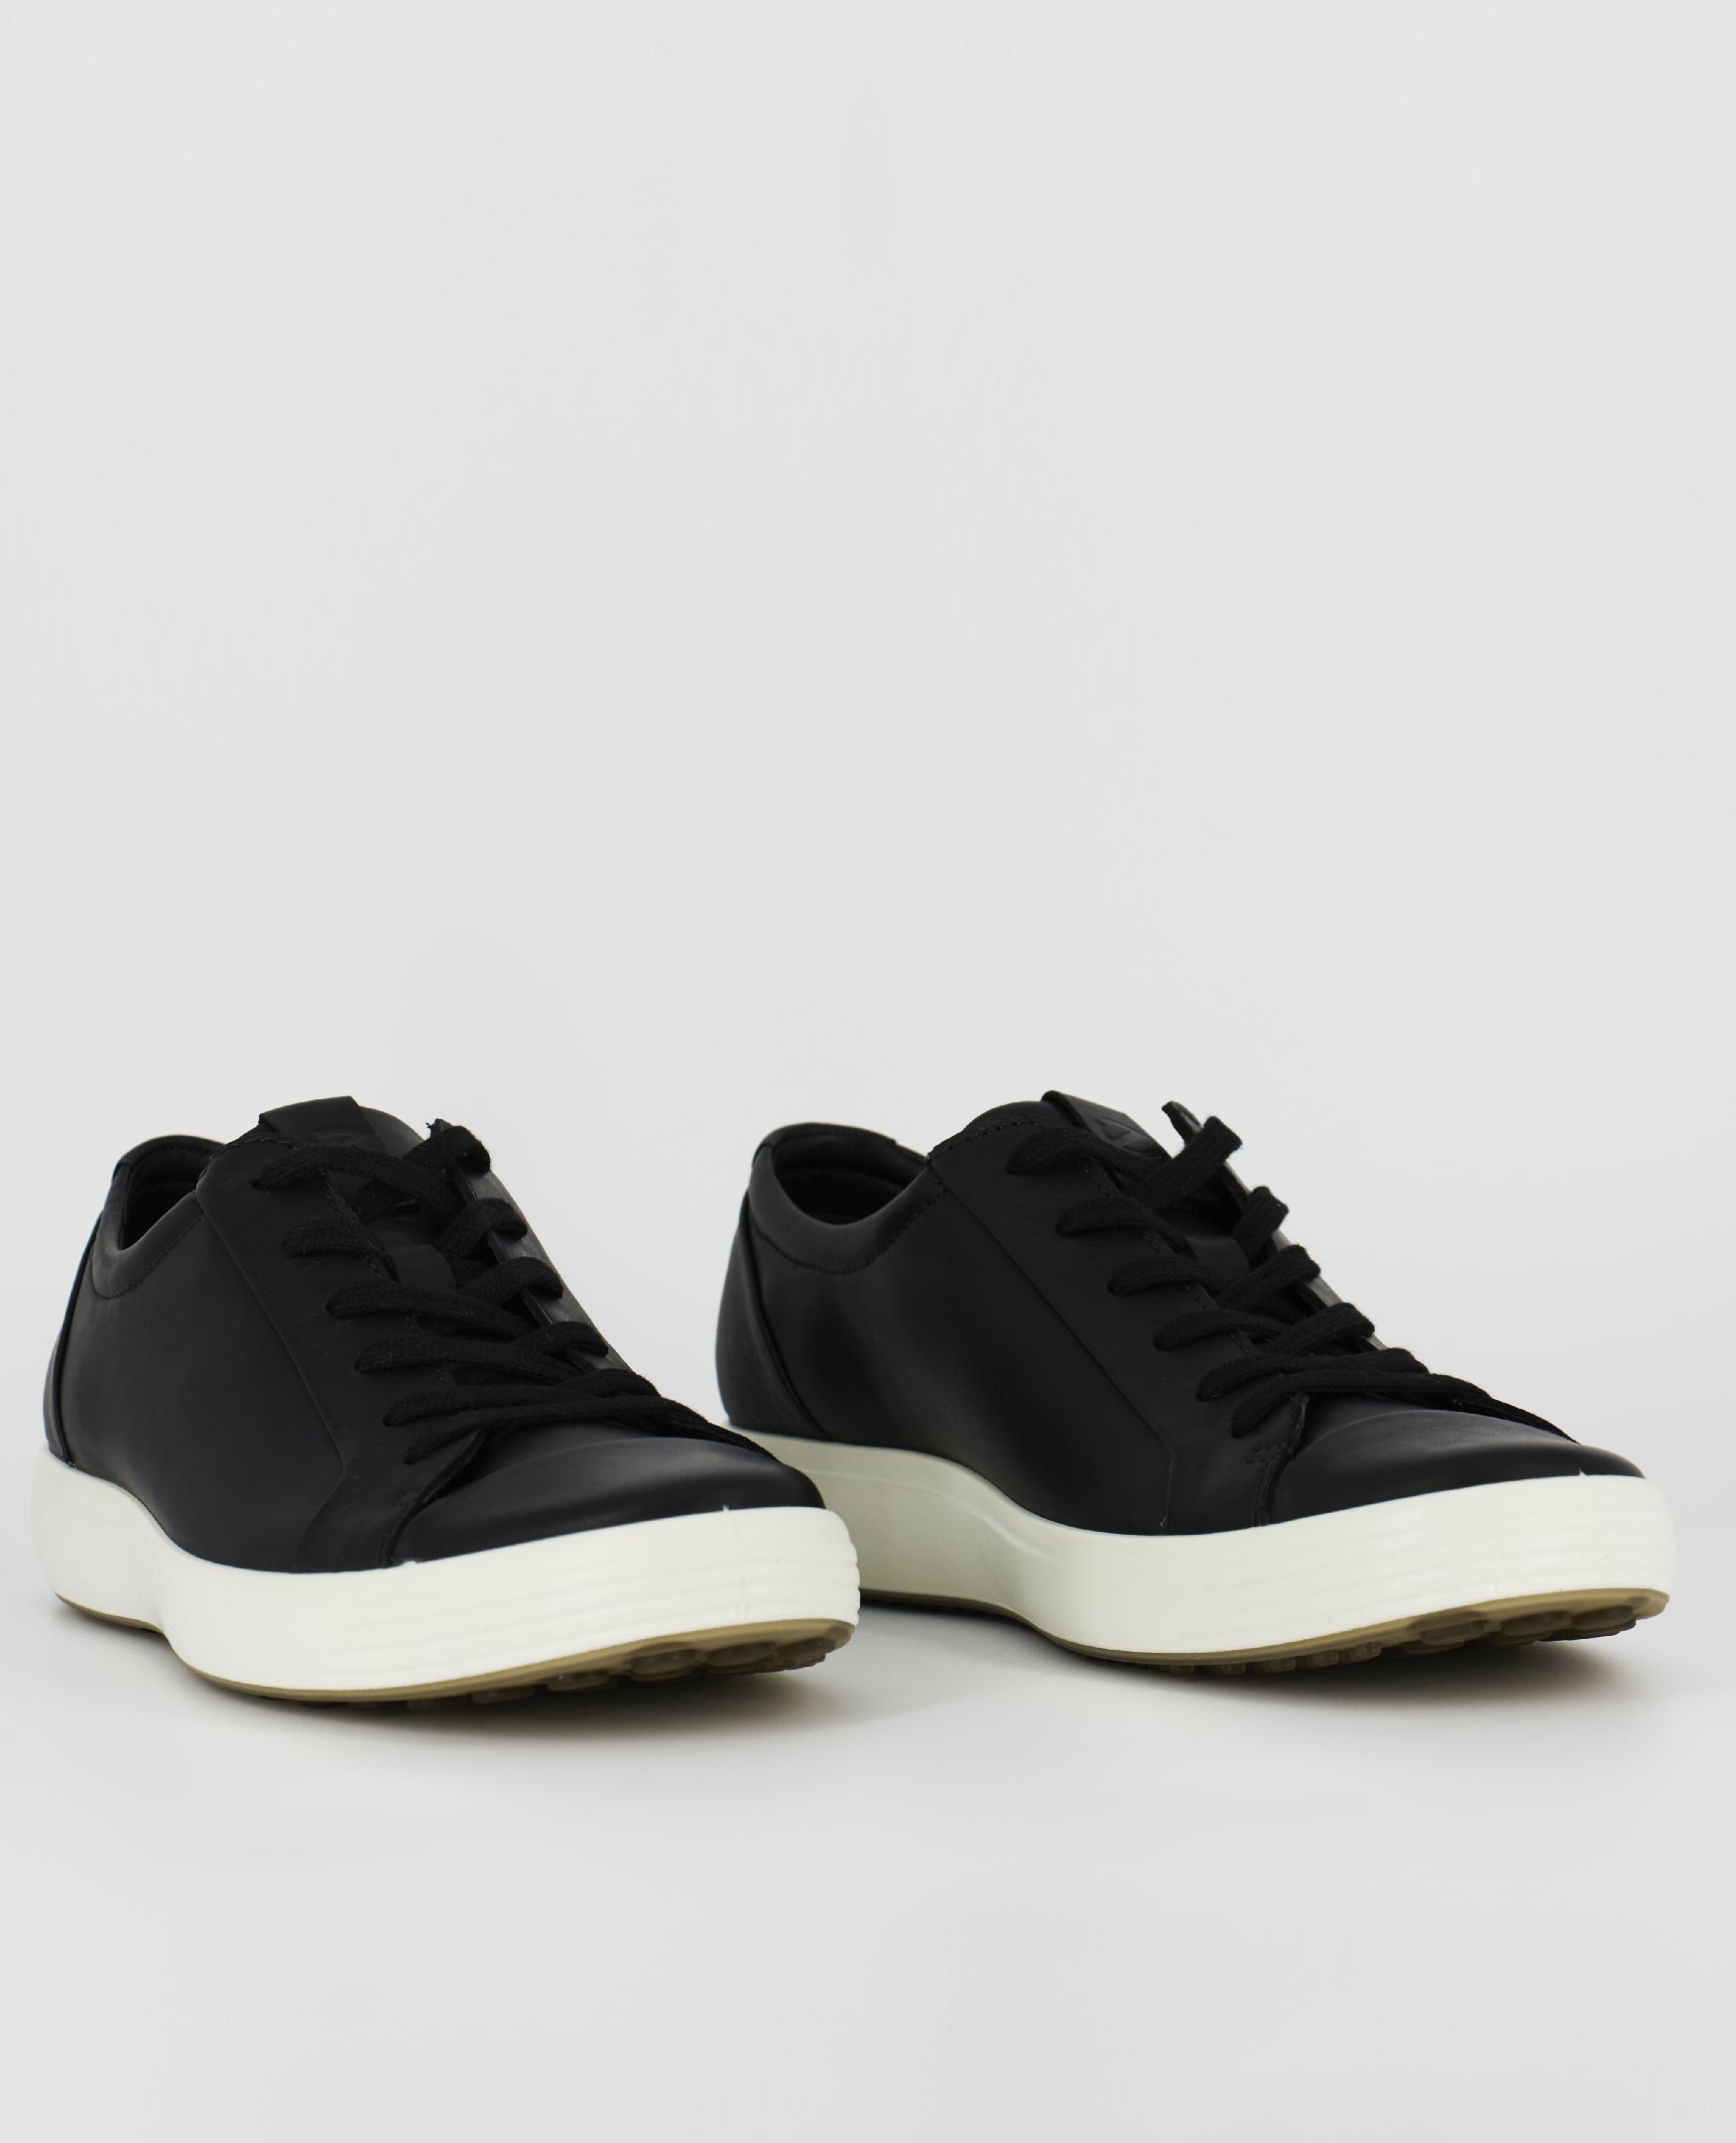 A group view of the Ecco Soft 7 M, in Black.